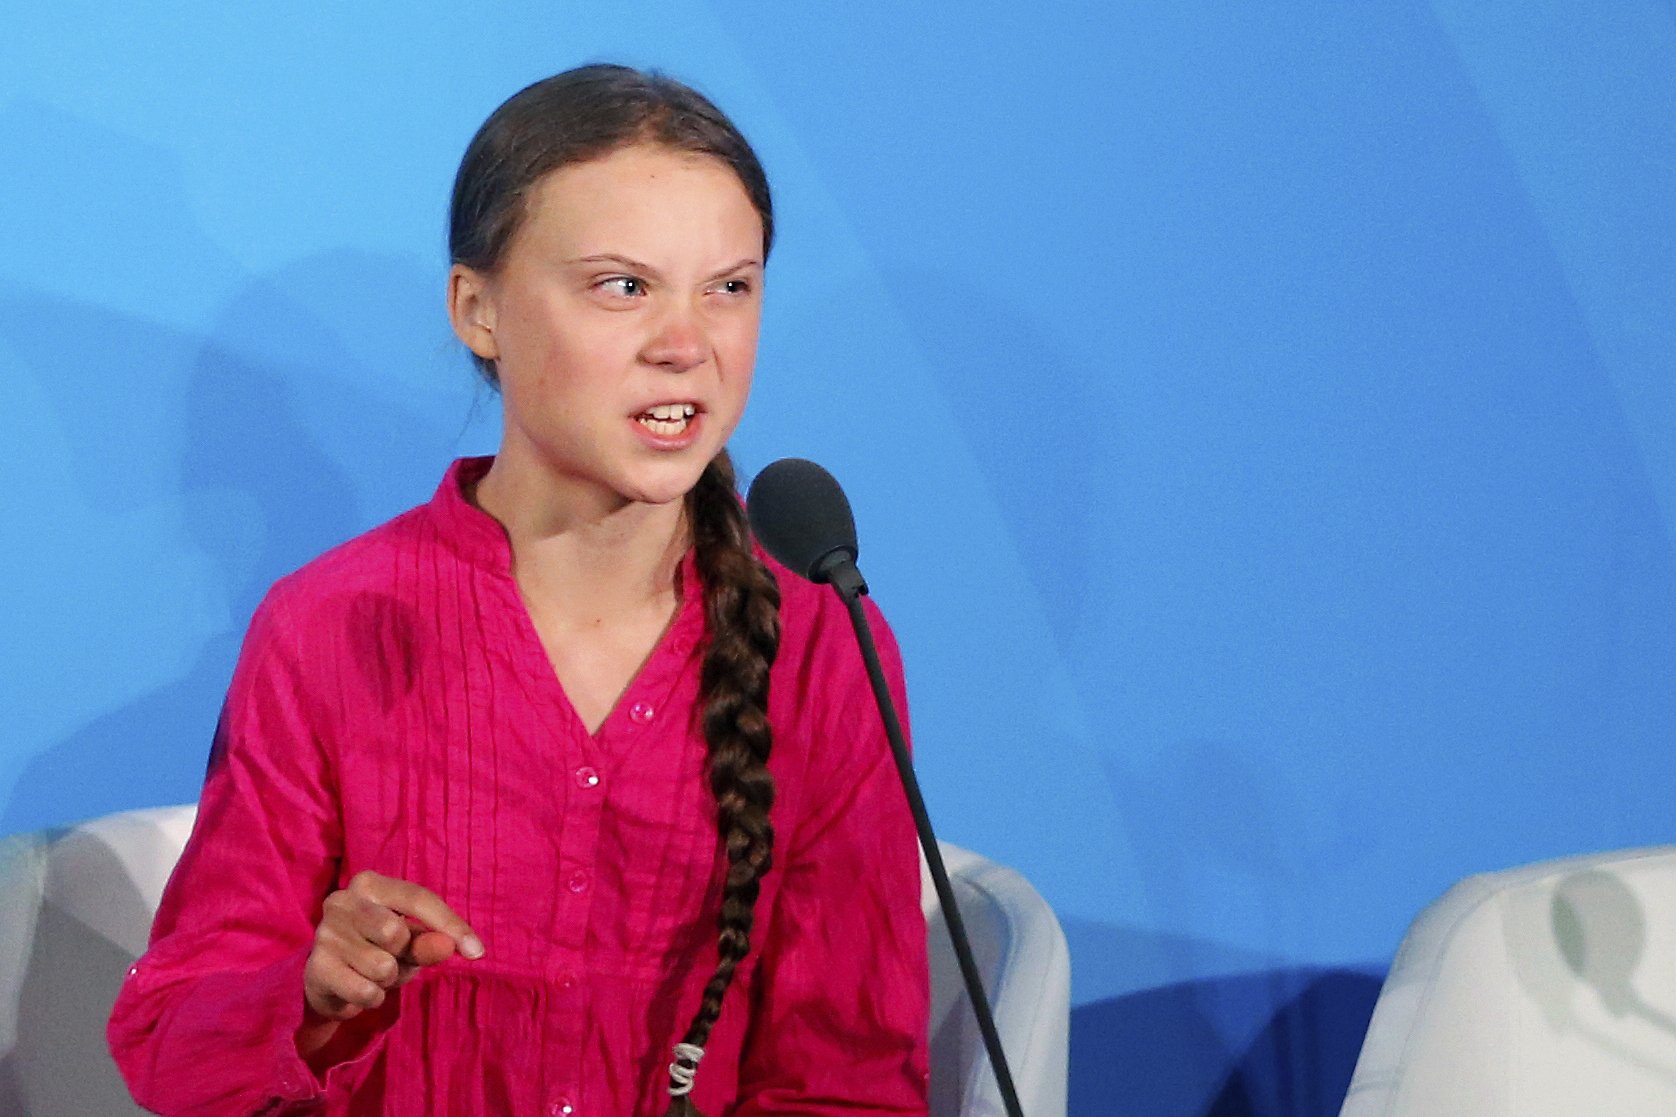 Youth activist Greta Thunberg addresses the Climate Action Summit at the United Nations on Sept. 23, 2019 in New York City. (Jason DeCrow — AP)